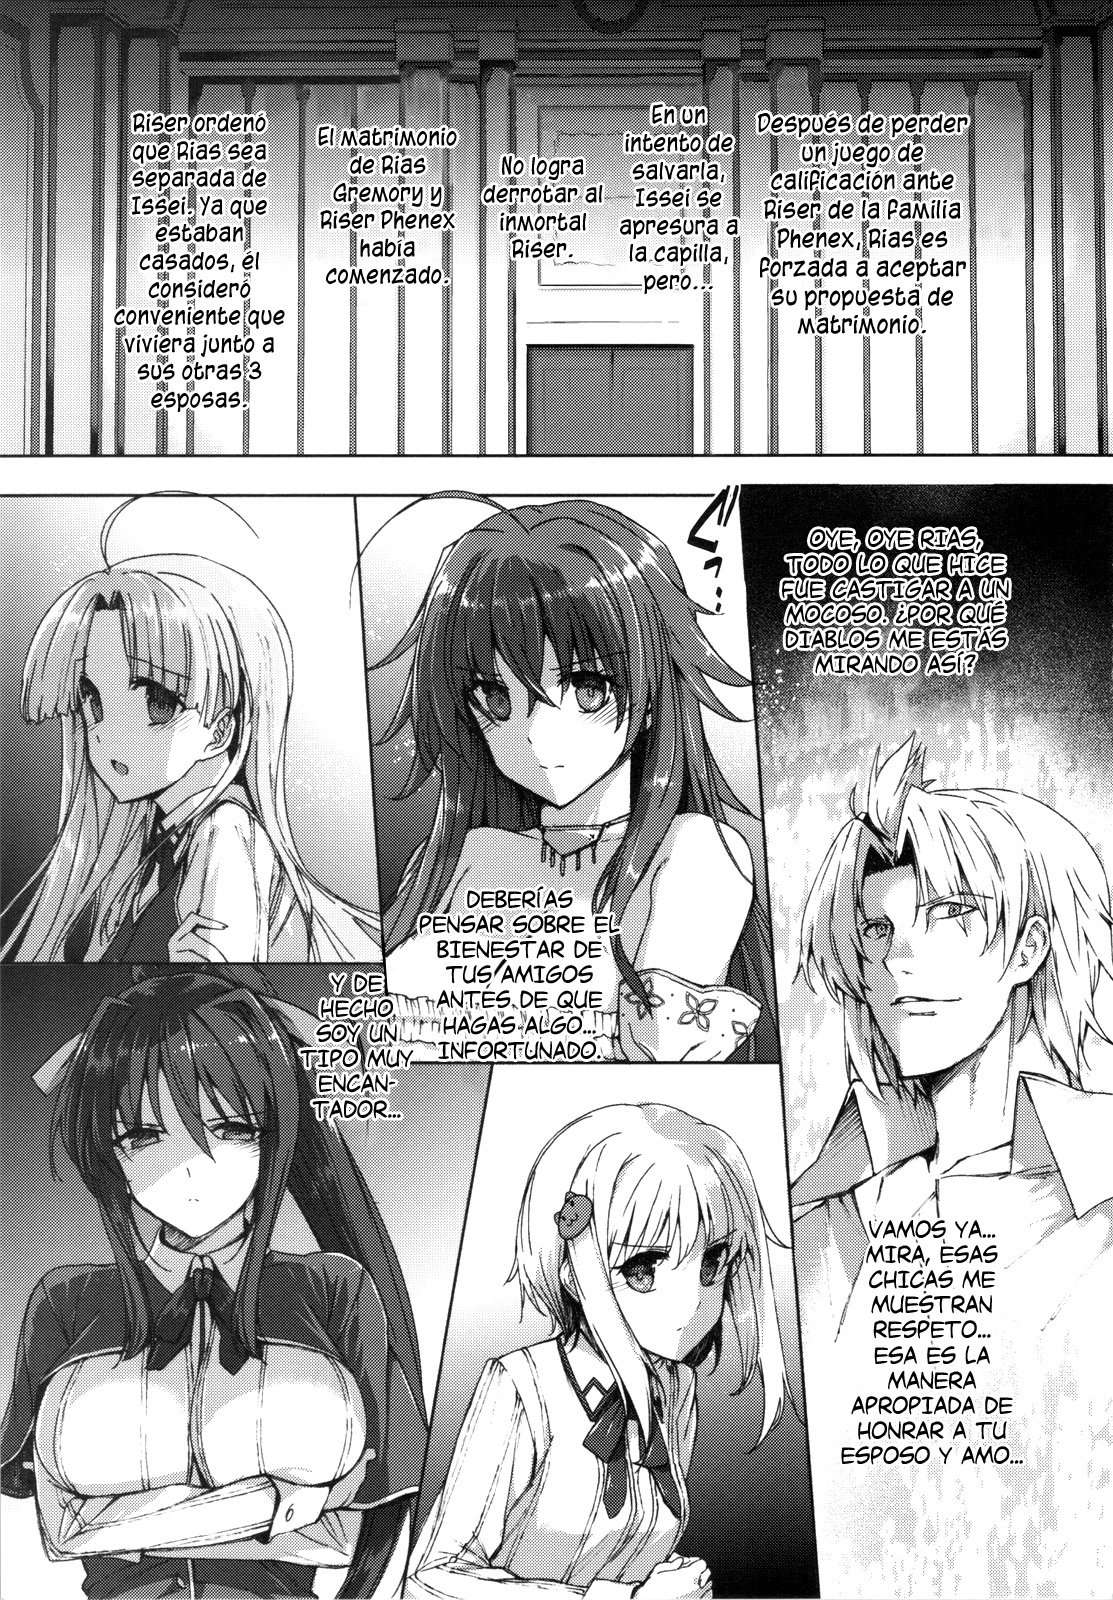 HIGH SCHOOL DxIf END. Chapter-1 - 6